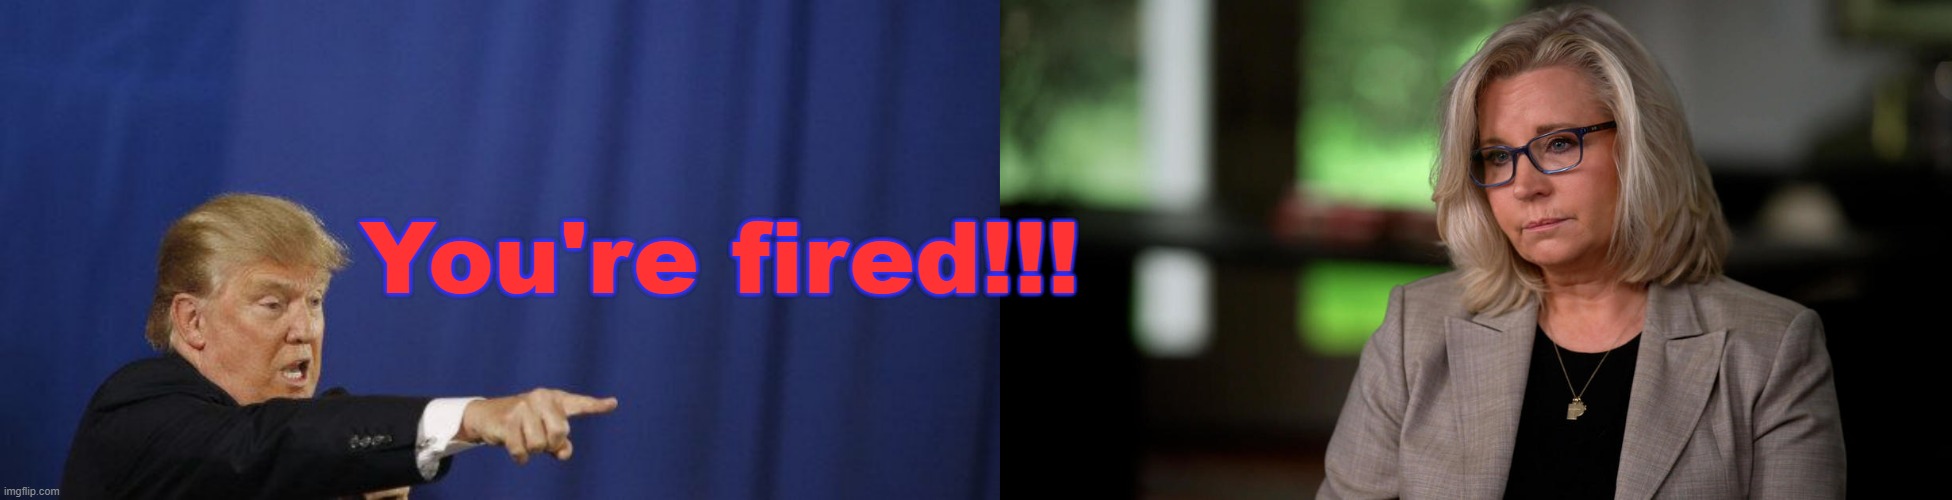 Trump tells Liz Cheney that she's fired!!! | You're fired!!! | image tagged in political meme,trump you're fired,liz cheney loses,elizabeth cheney voted out,rino cheny,conservative win | made w/ Imgflip meme maker